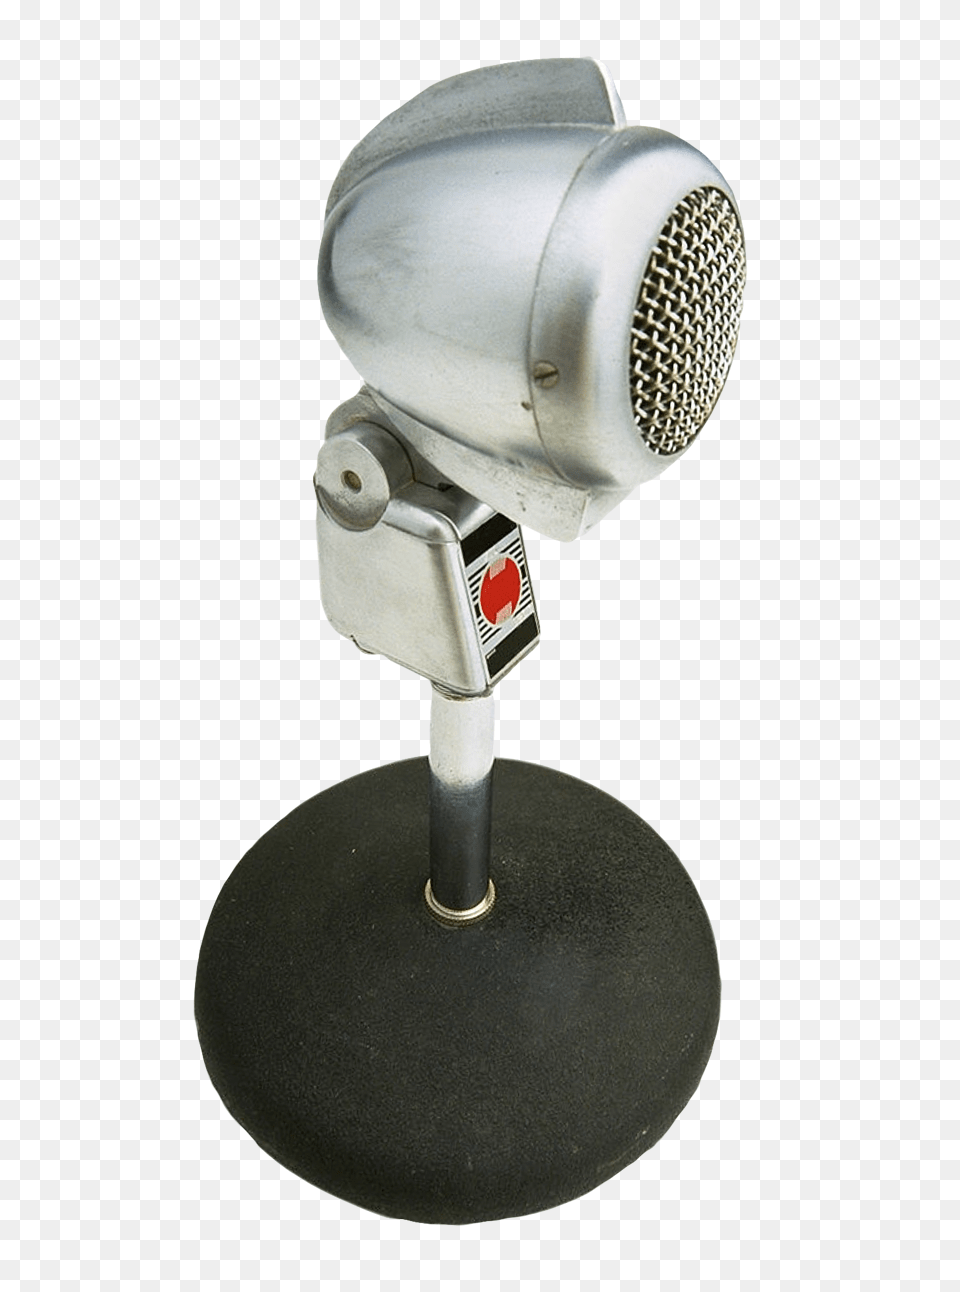 Pngpix Com Mic Transparent Image, Electrical Device, Microphone, Appliance, Blow Dryer Png